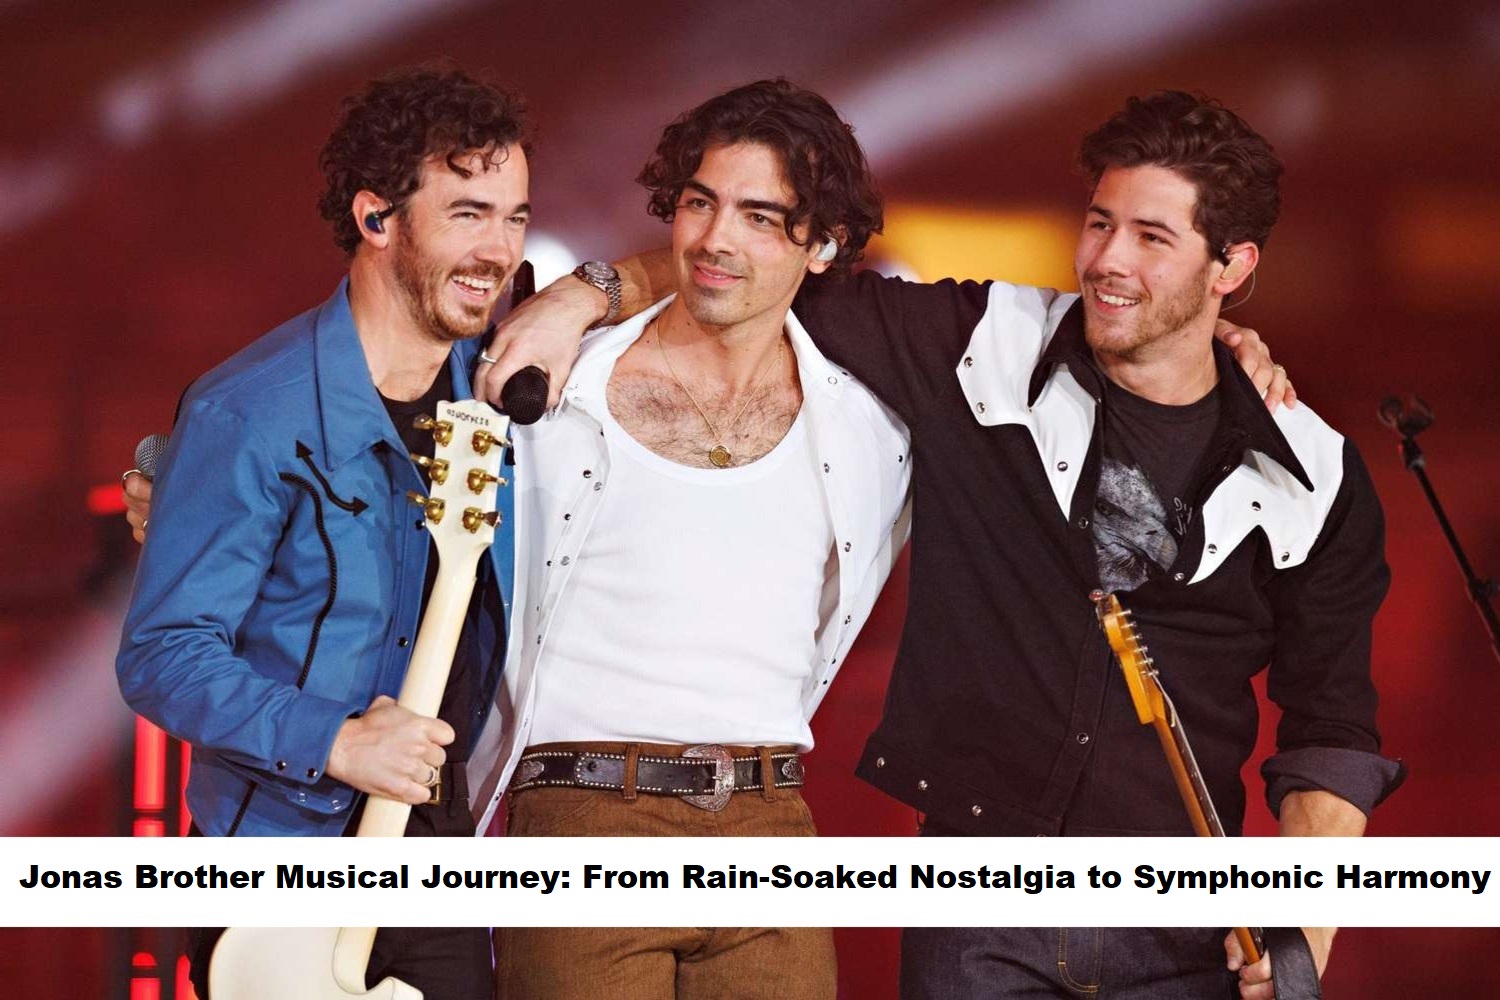 Jonas Brother Musical Journey From Rain-Soaked Nostalgia to Symphonic Harmony